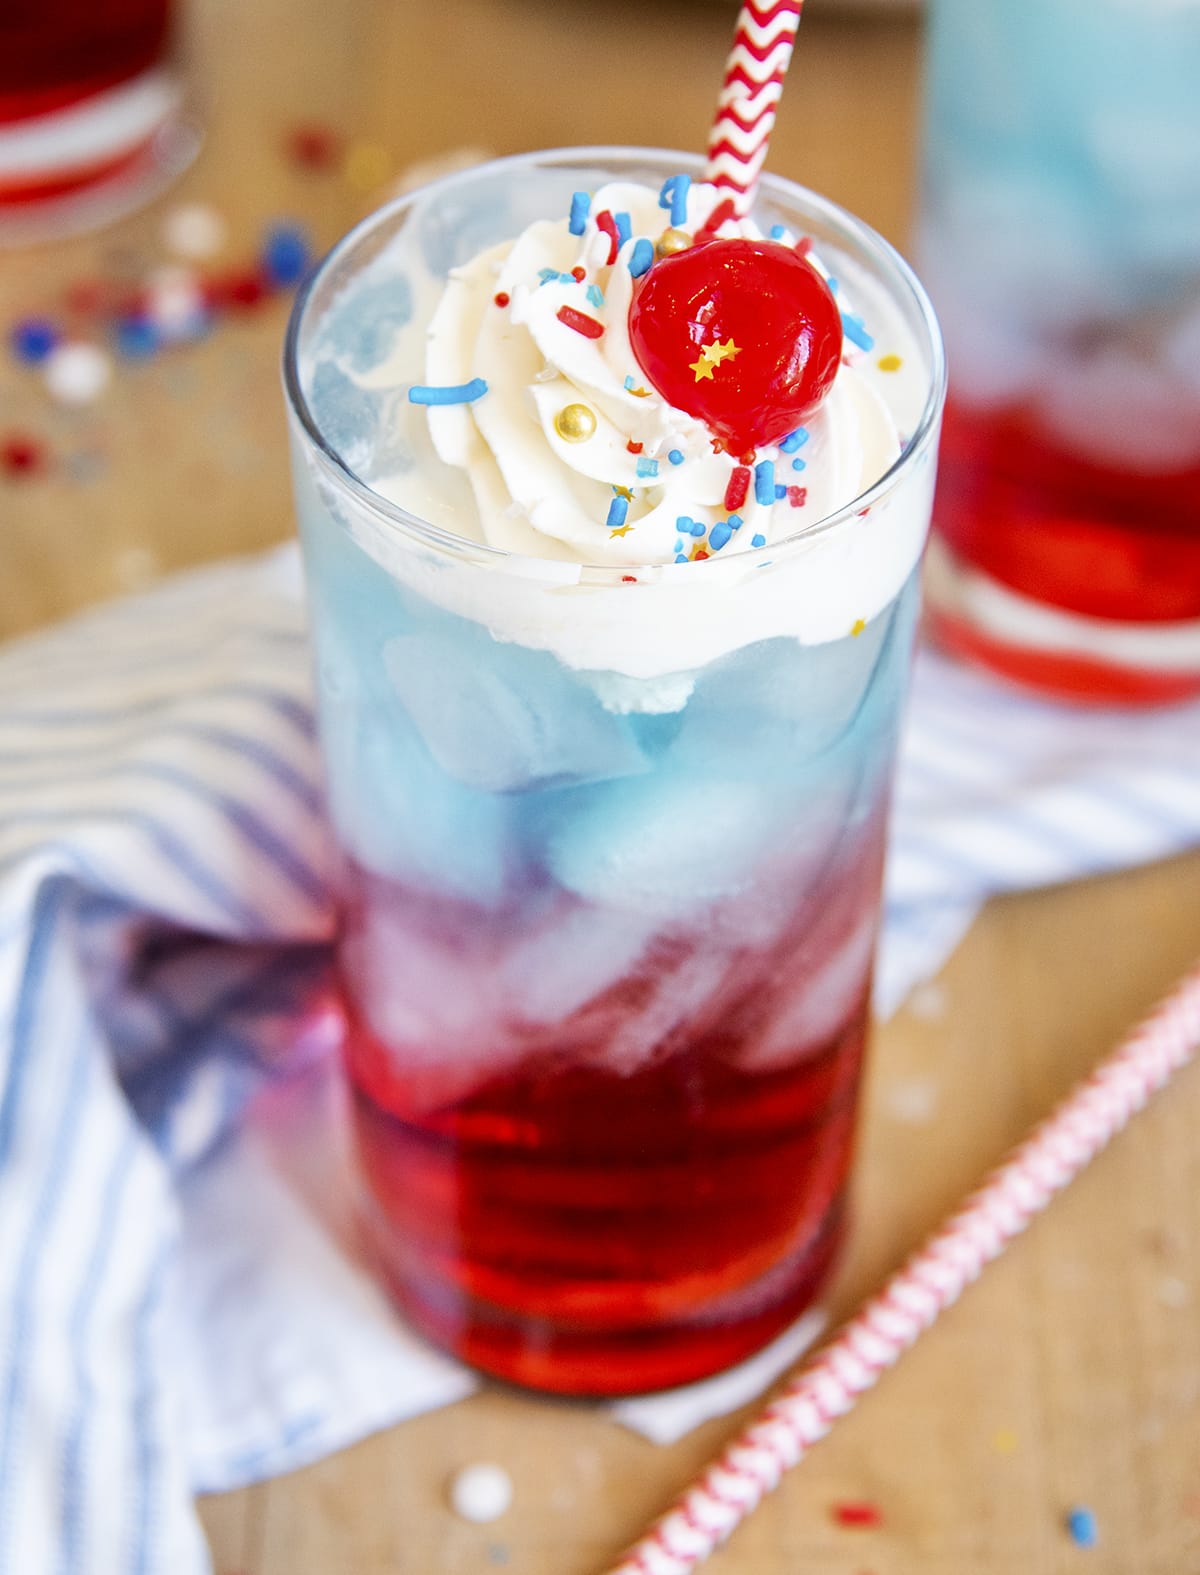 A glass of a half red, half blue drink topped with whipped cream and a cherry.